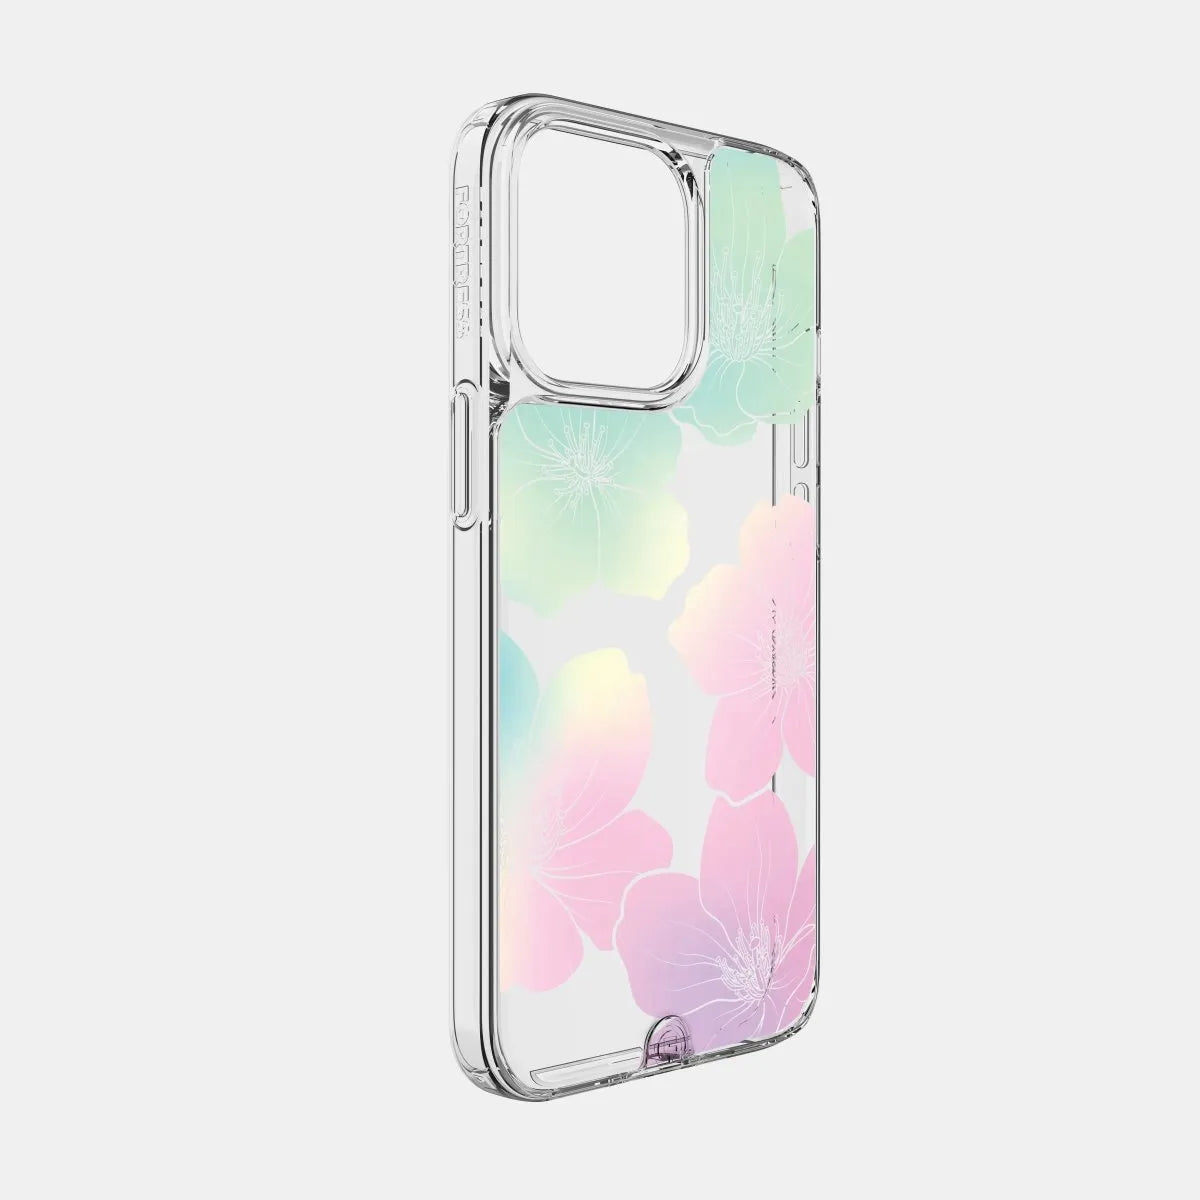 Gear4 Crystal Palace iPhone 11 Pro Max Case - Iridescent